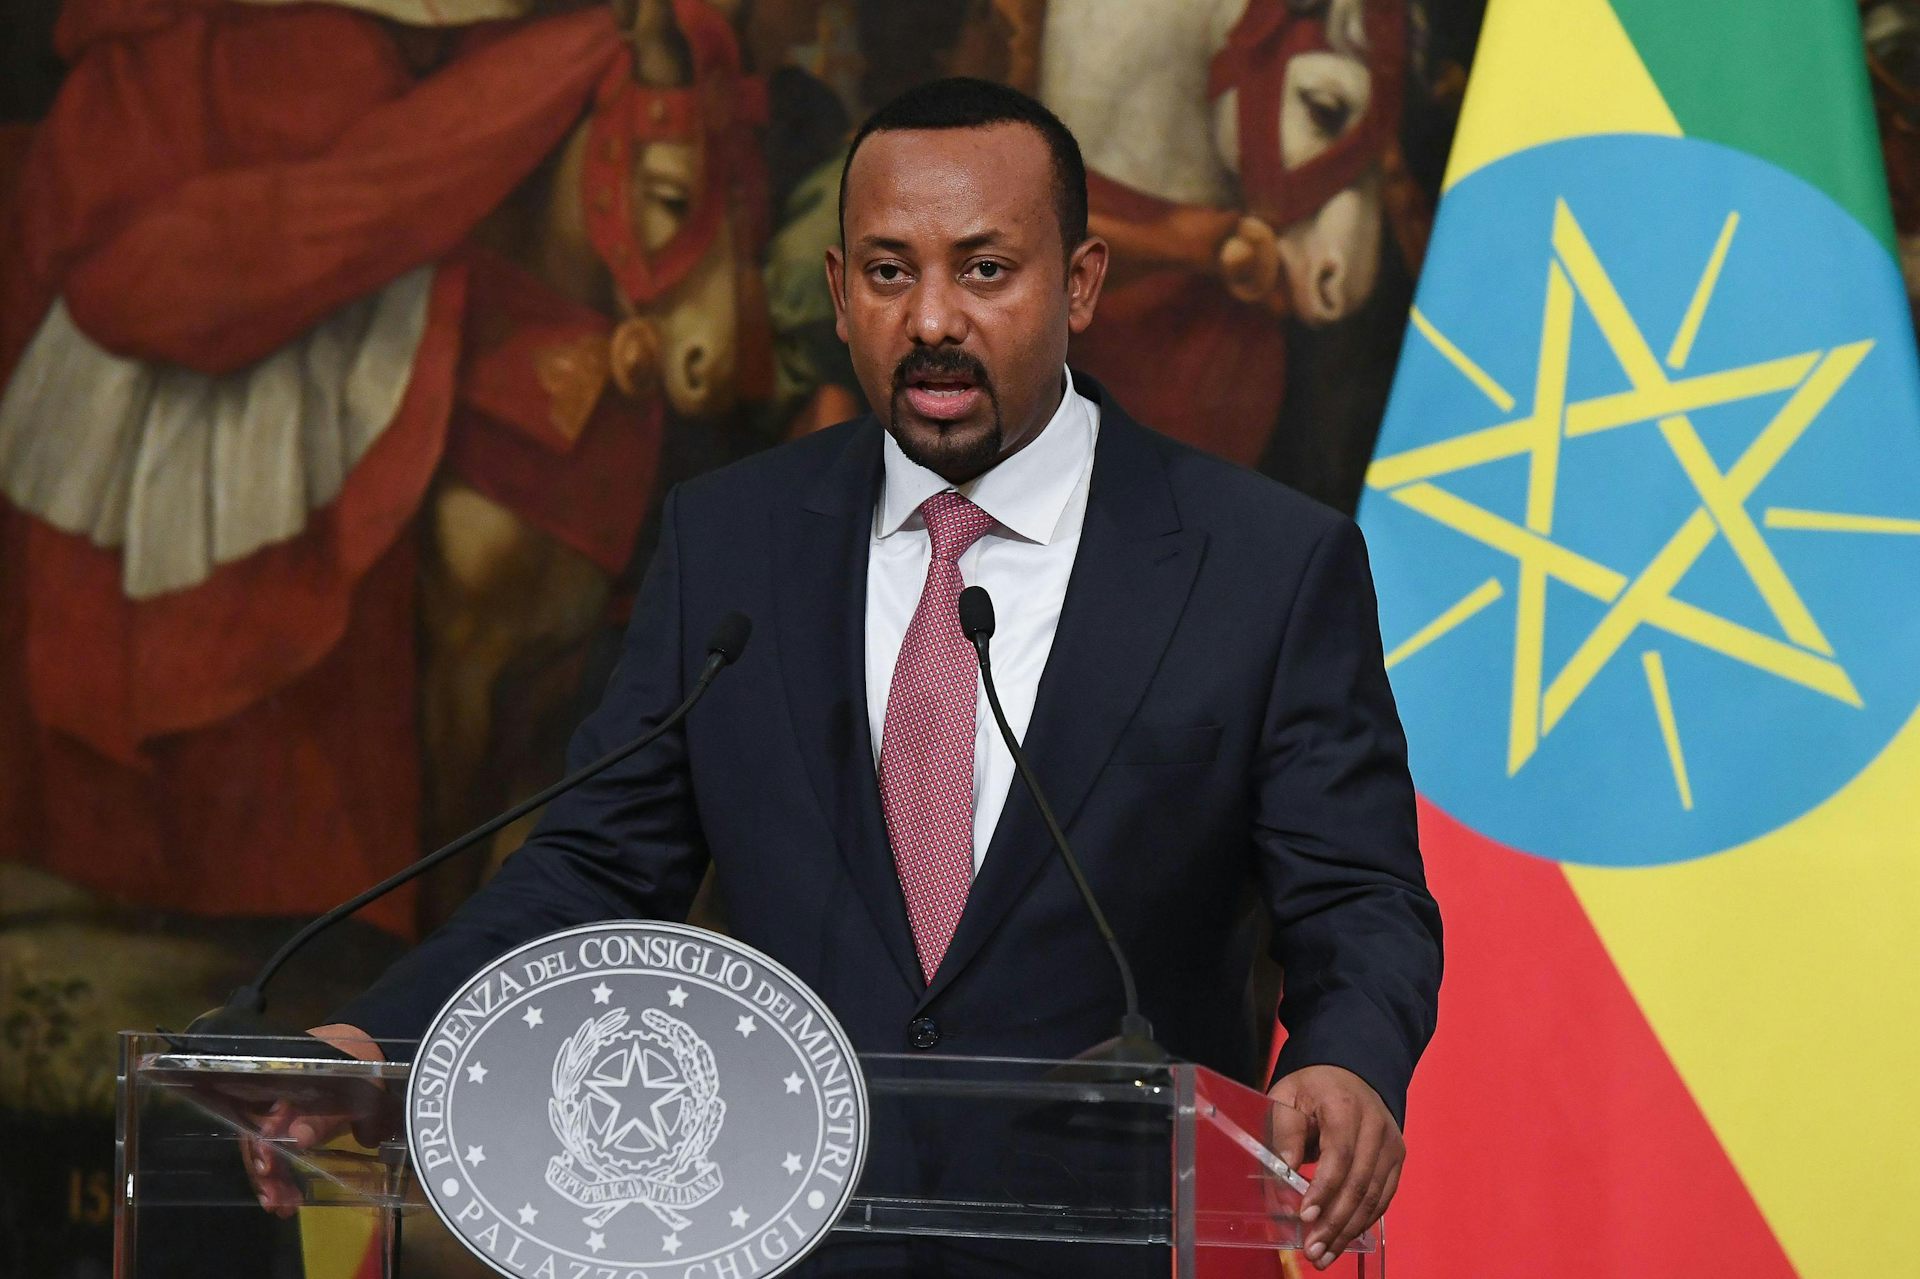 Ethiopia Needs a New Rallying Point Instead of Recycling Its Painful Past